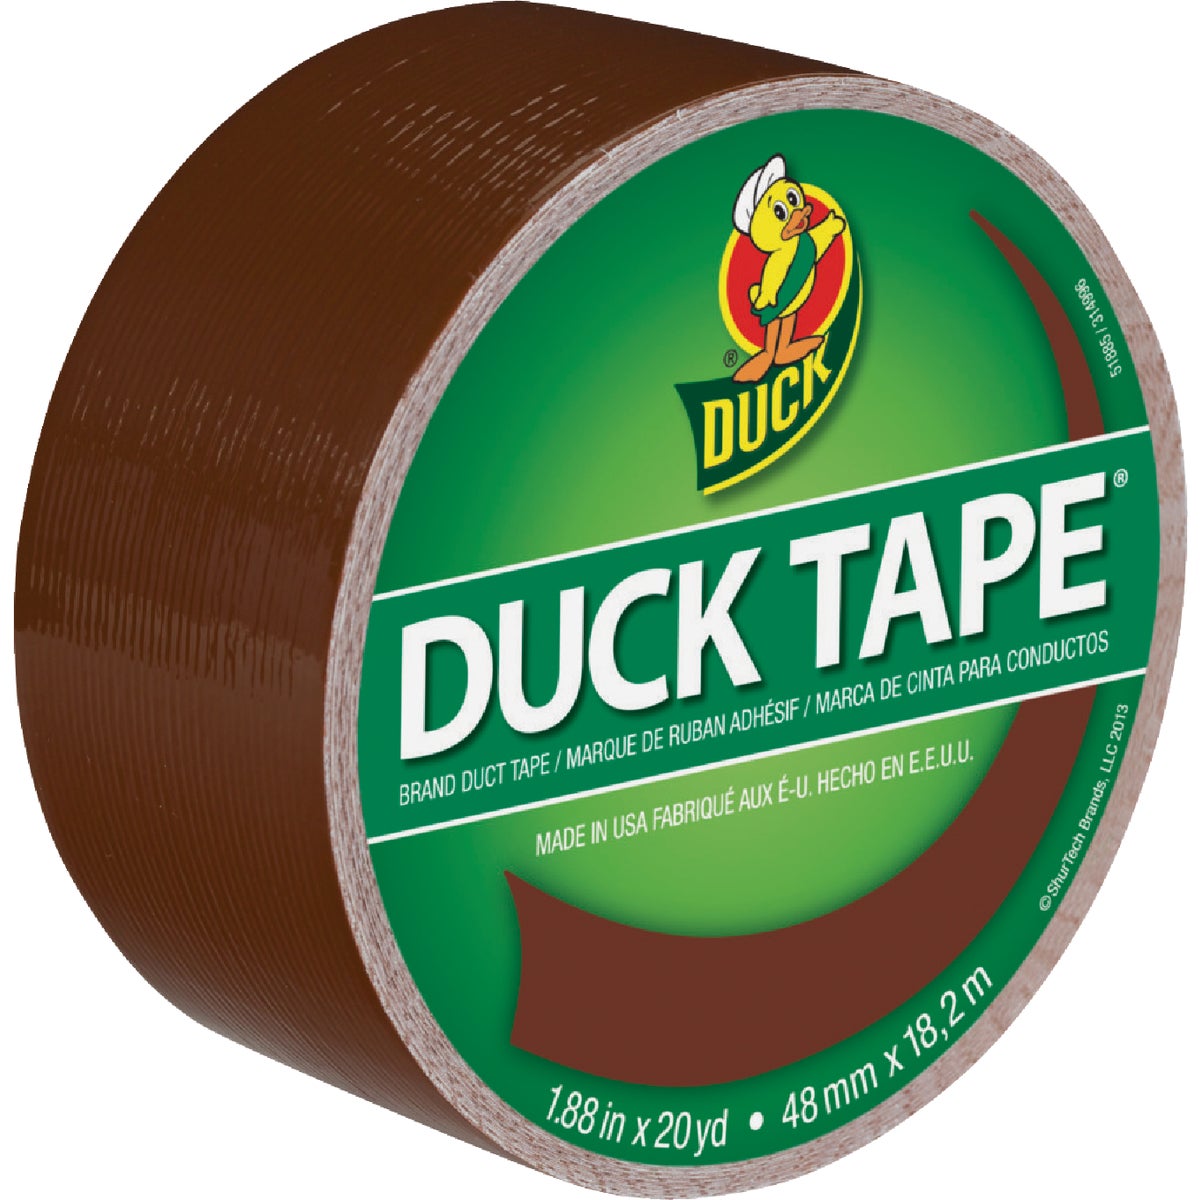 Duck Tape 1.88 In. x 20 Yd. Colored Duct Tape, Brown